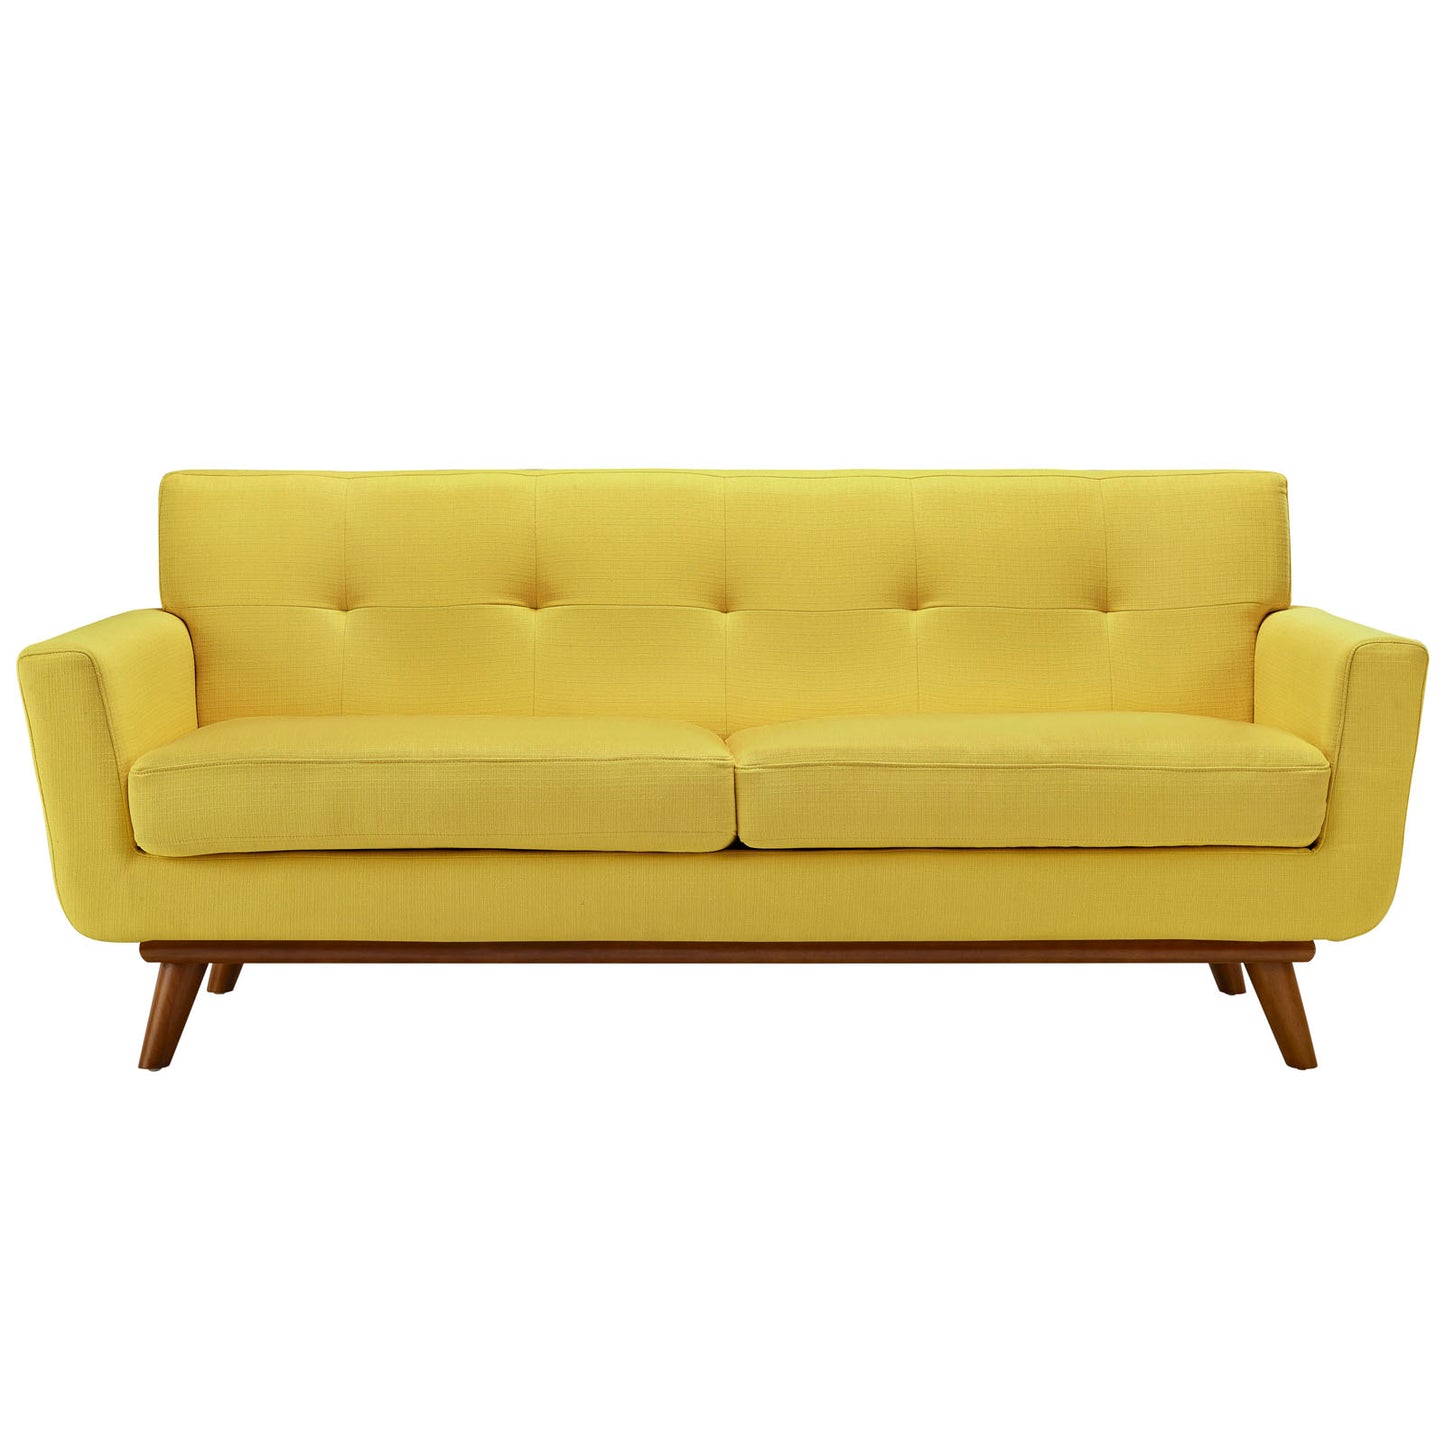 Modway Engage Upholstered Loveseat - EEI-1179